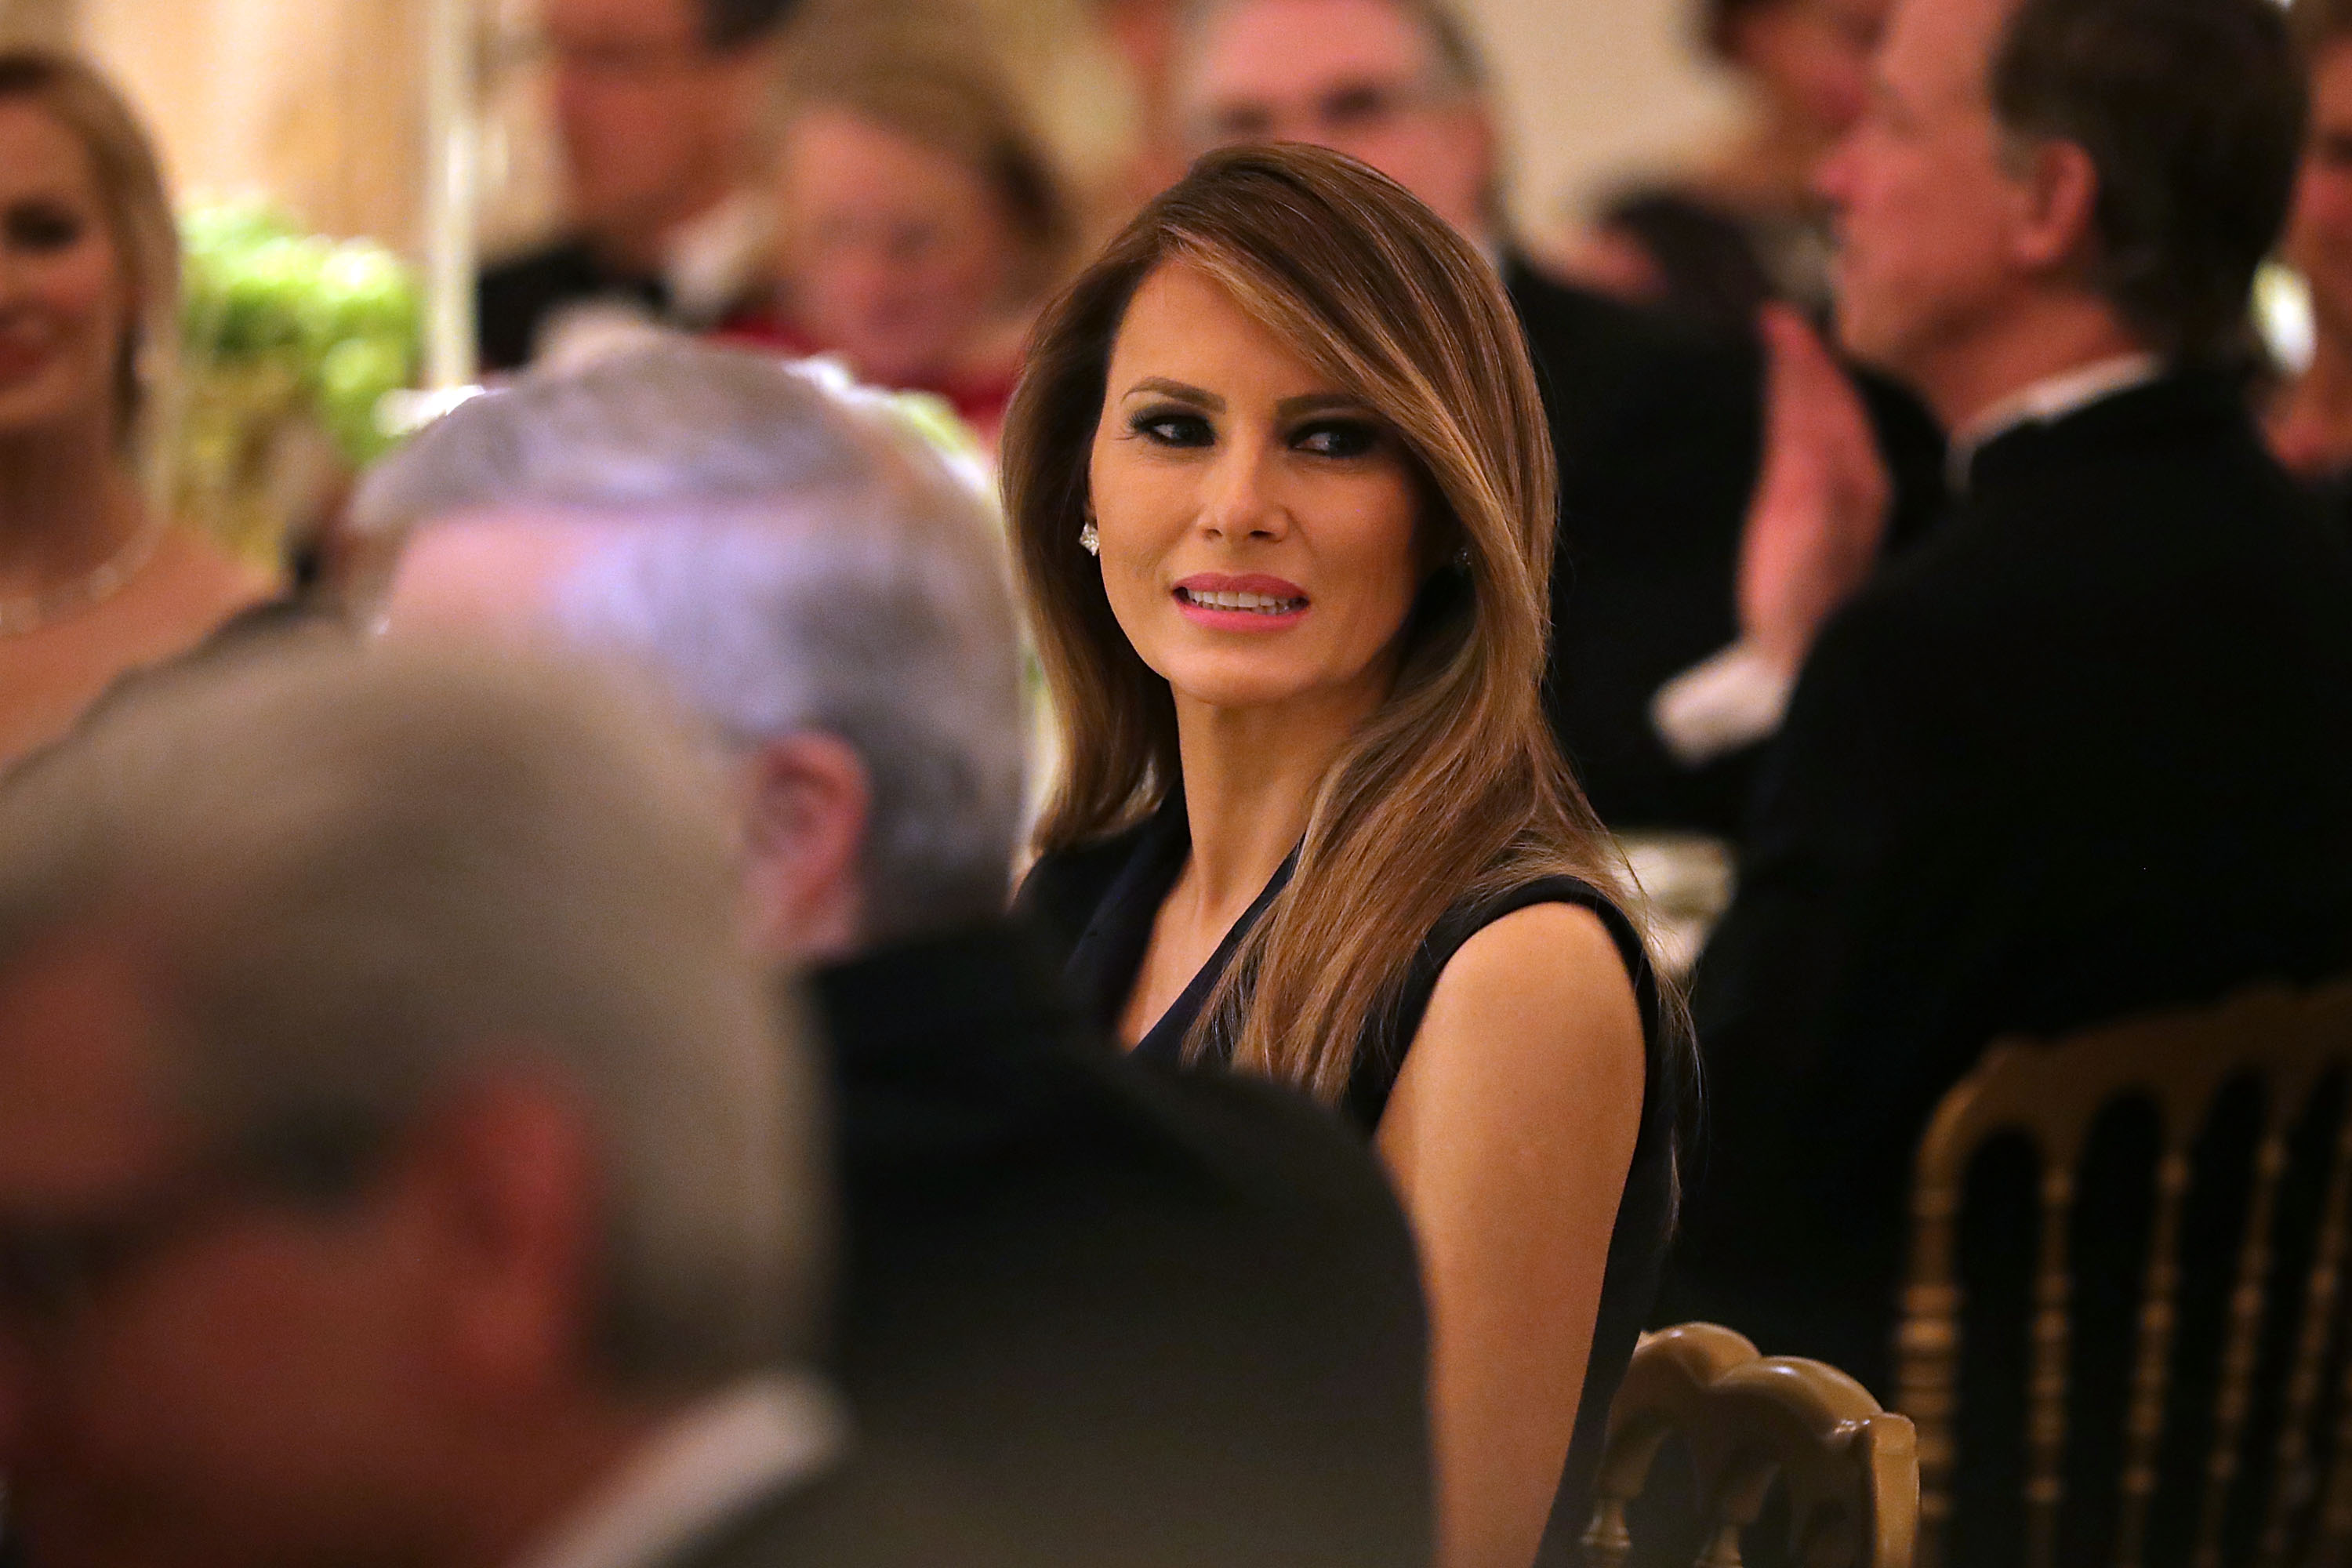 U.S. first lady Melania Trump listens to a toast by her husband President Donald Trump while hosting the annual Governors' Dinner in the East Room of the White House February 26, 2017 in Washington, DC. (Chip Somodevilla—;Getty Images)